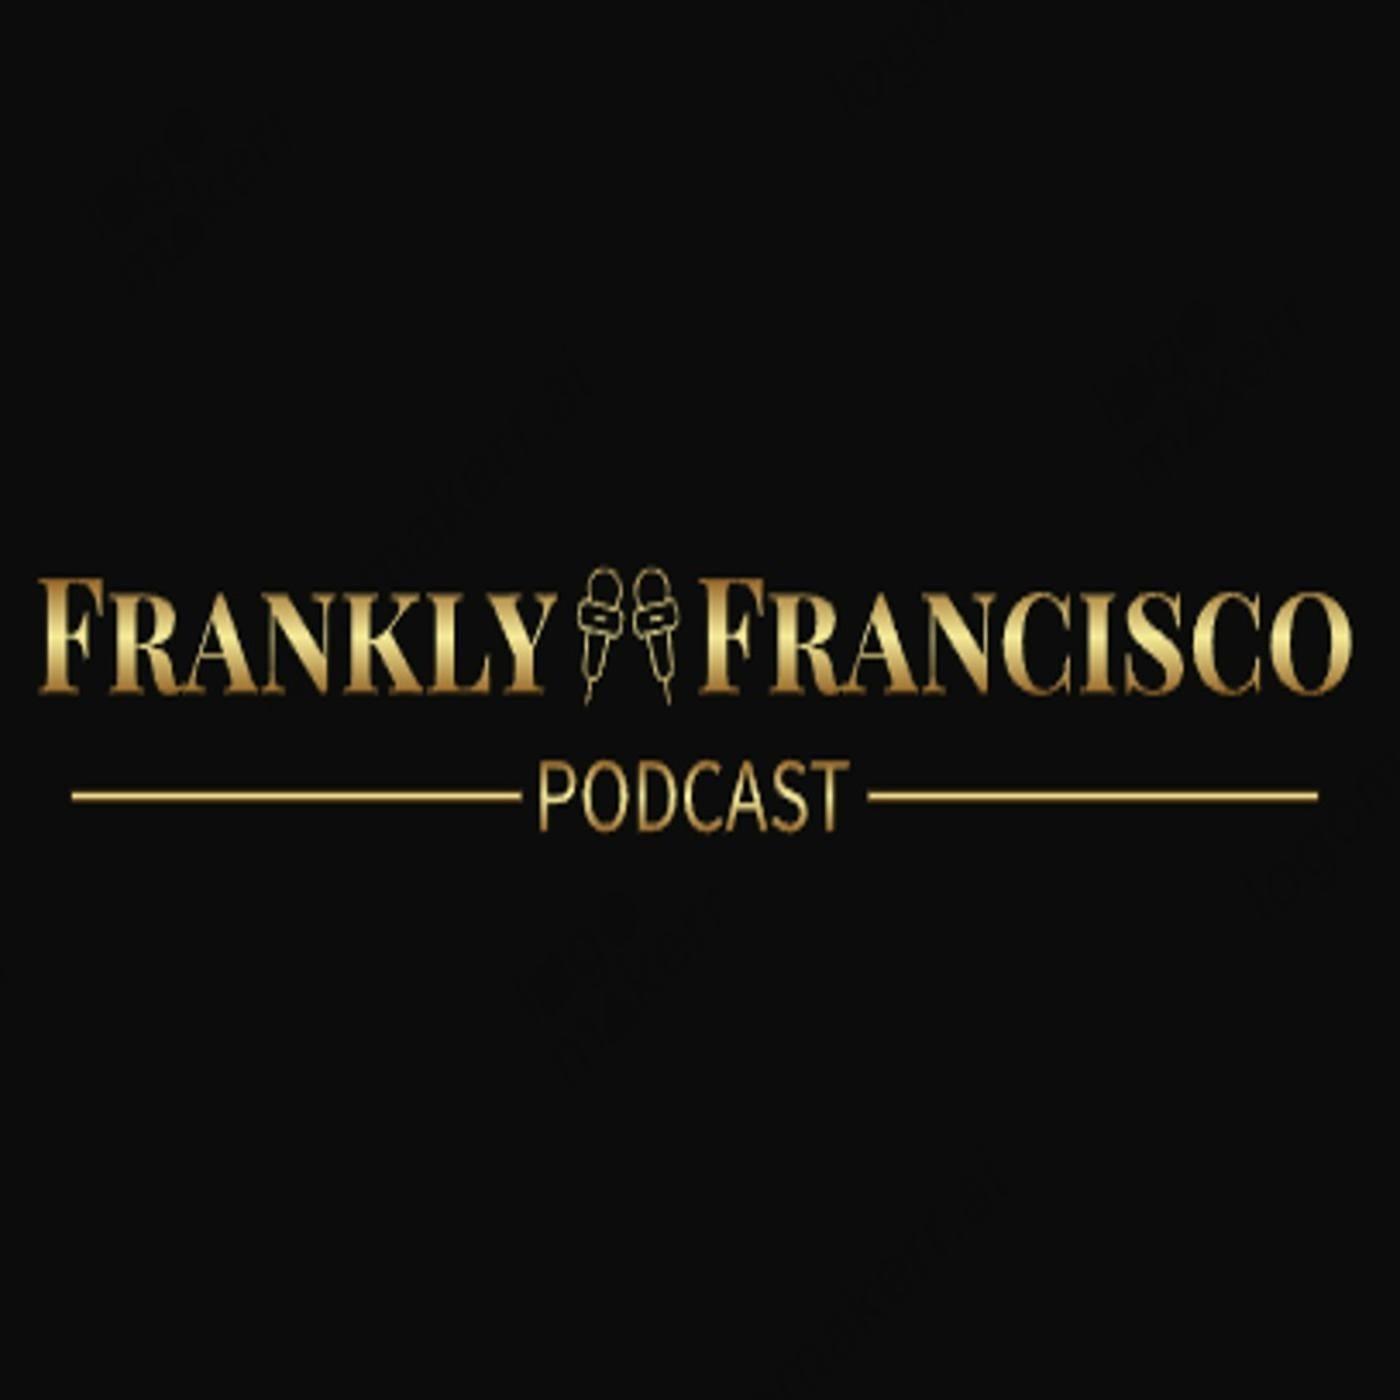 Frankly Francisco Podcast